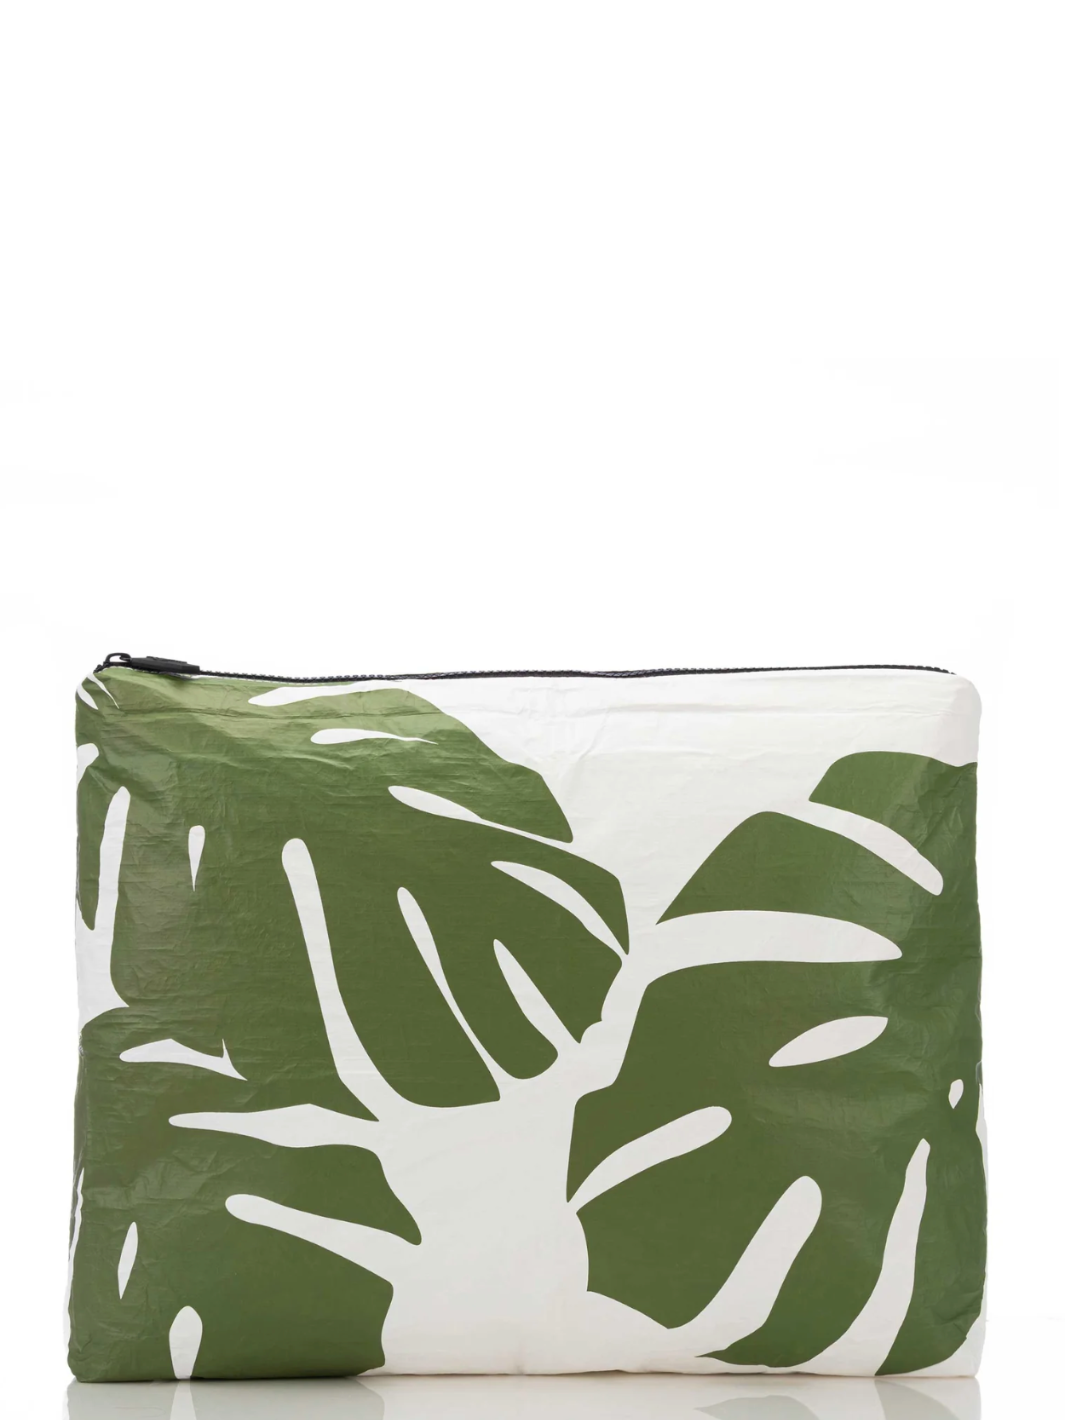 MAX POUCH IN MONSTERA - Romi Boutique